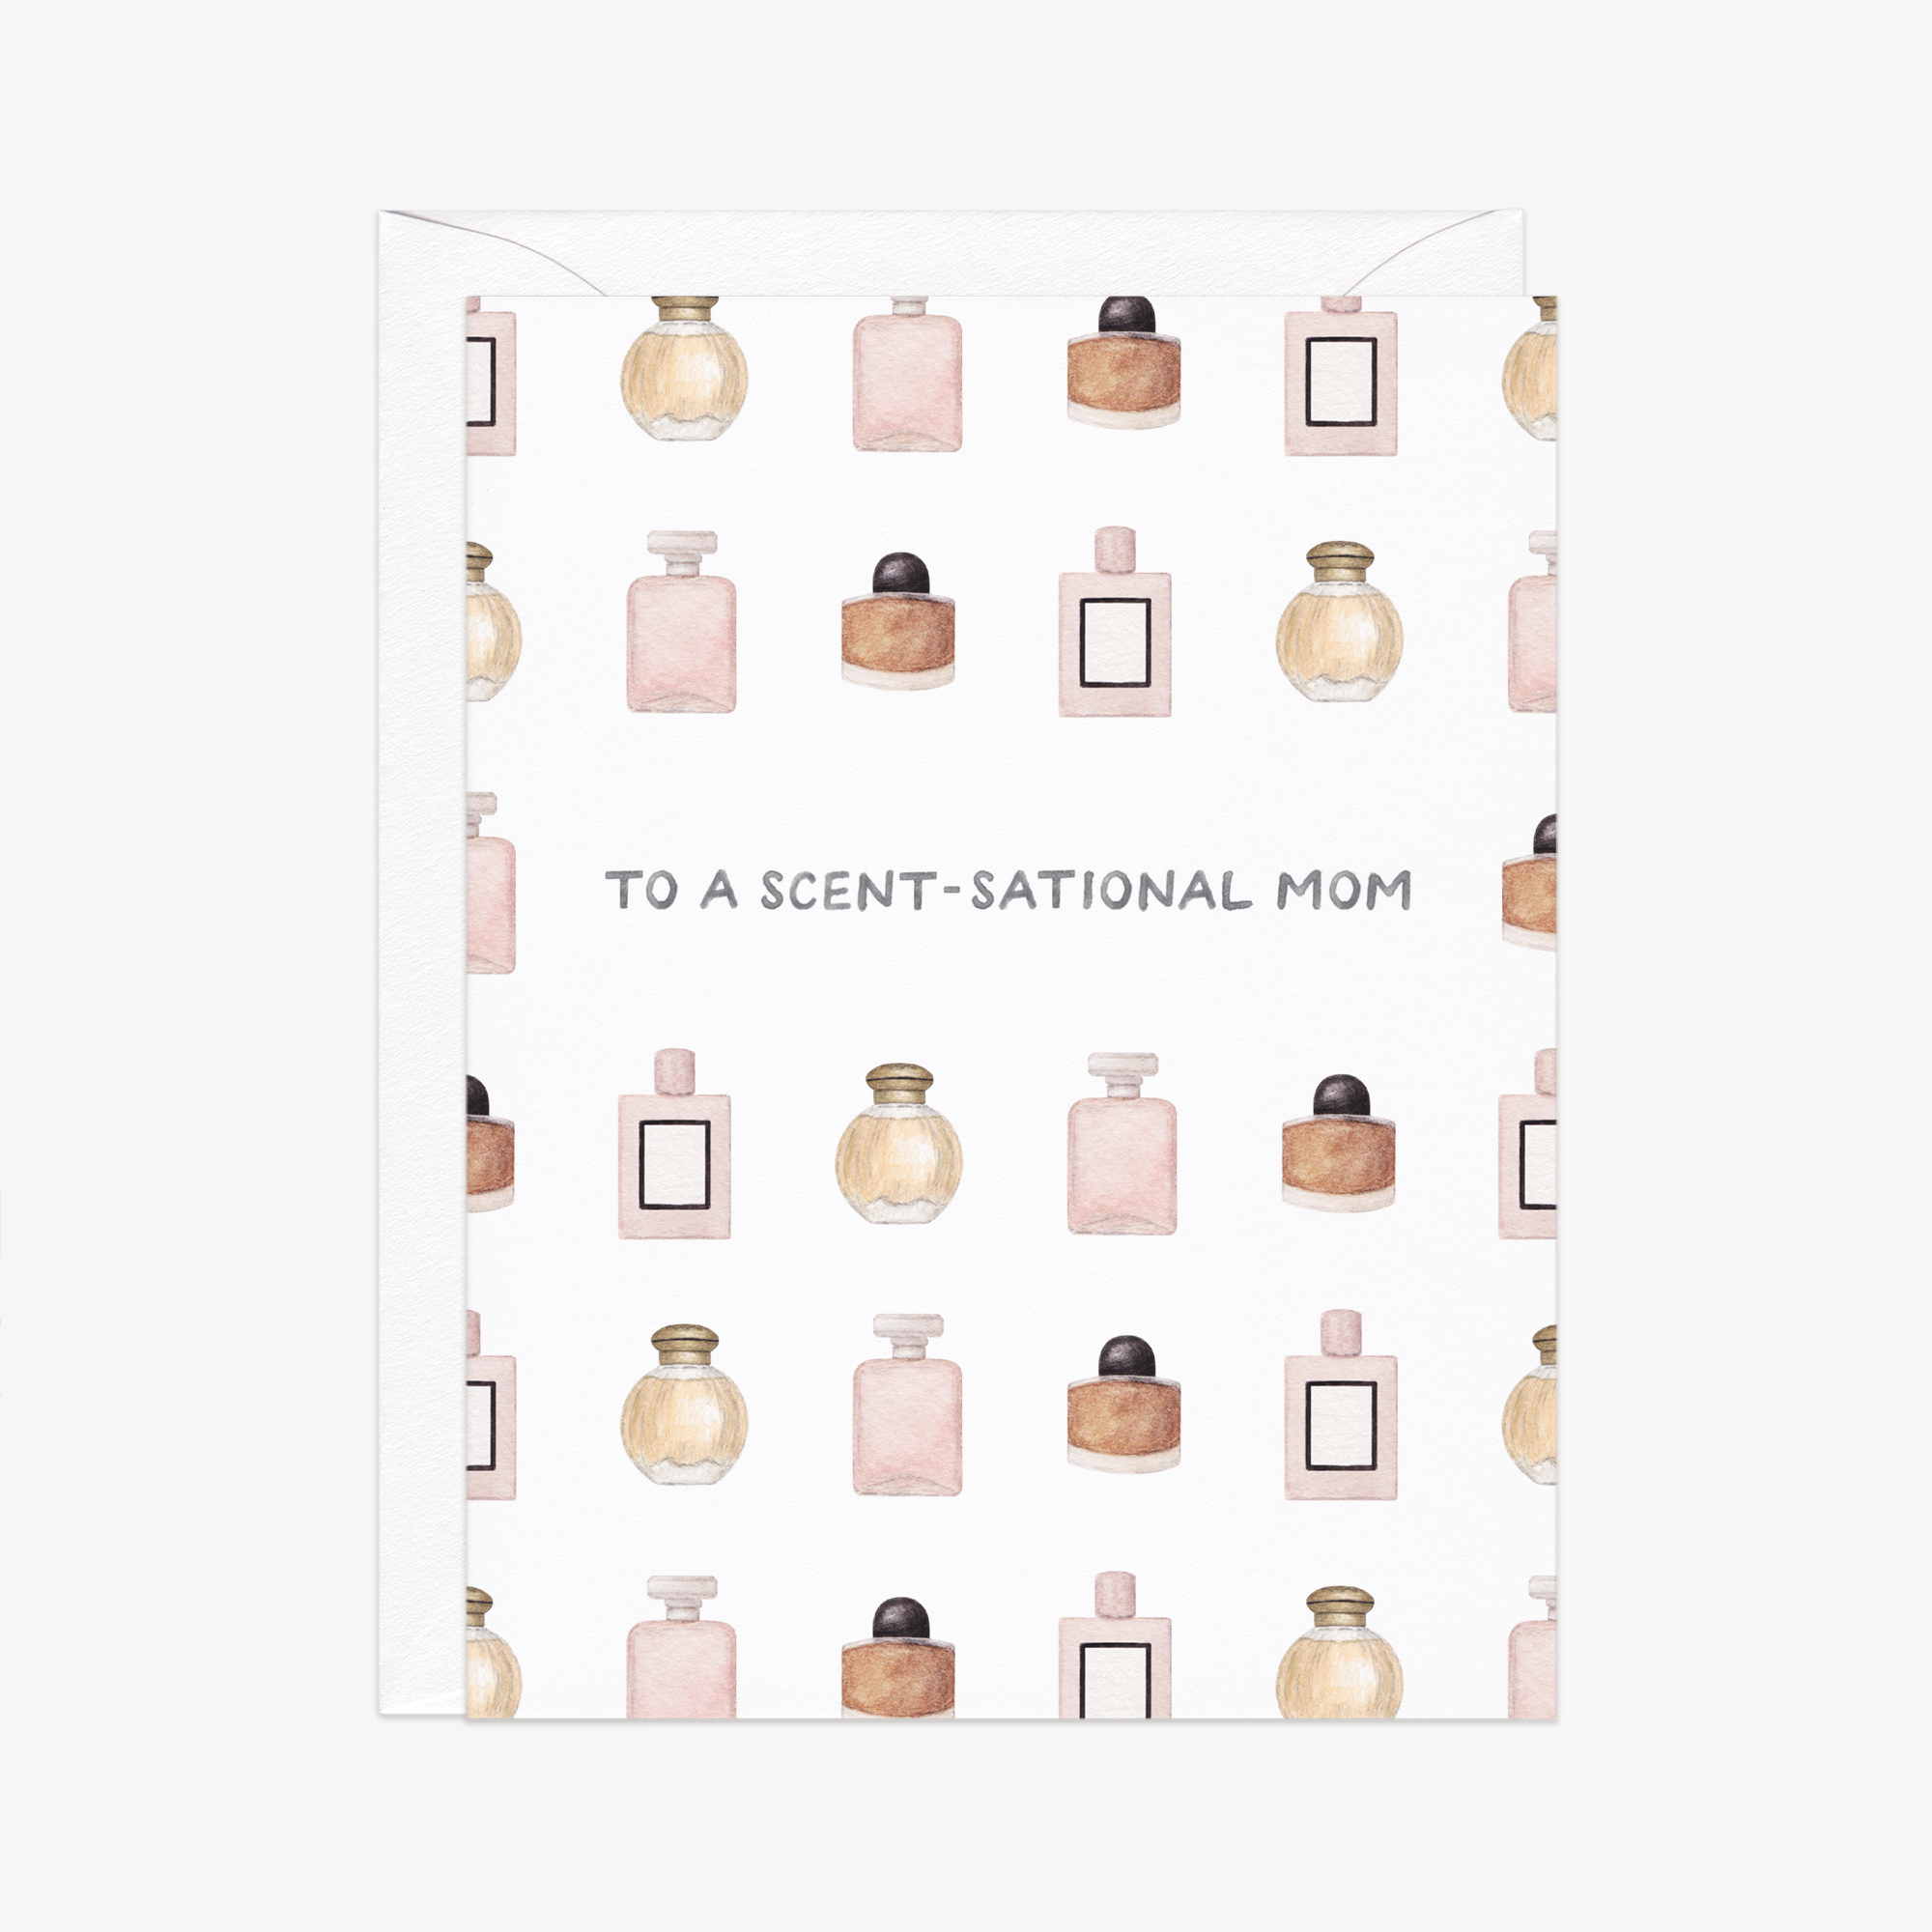 Scent-sational Perfume Mother’s Day Card